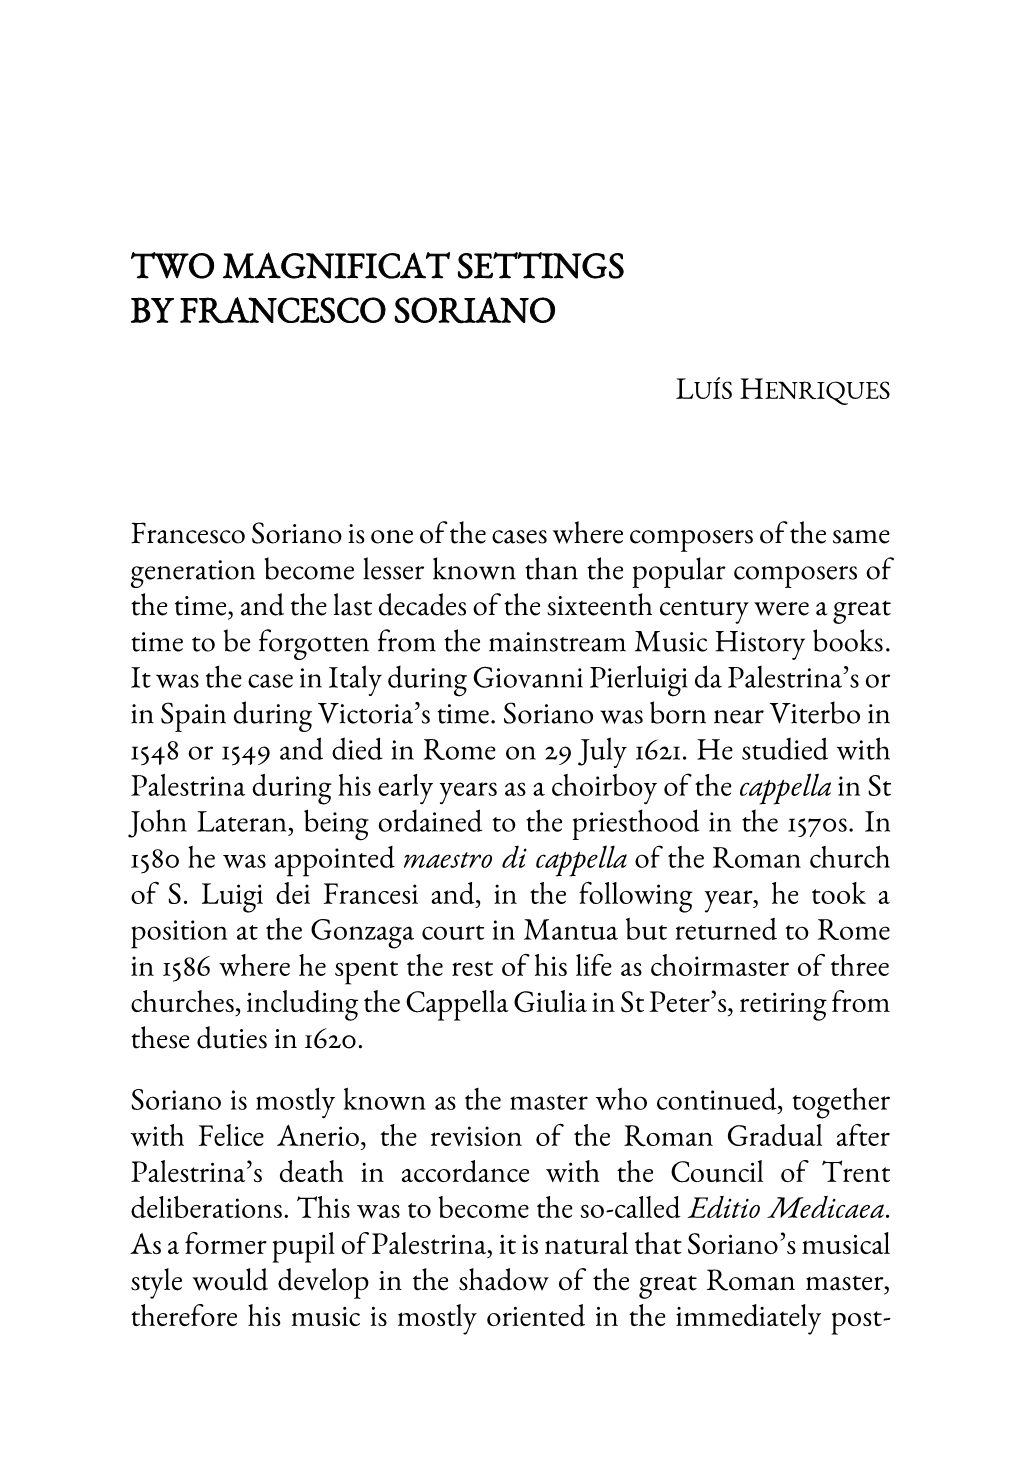 Two Magnificat Settings by Francesco Soriano